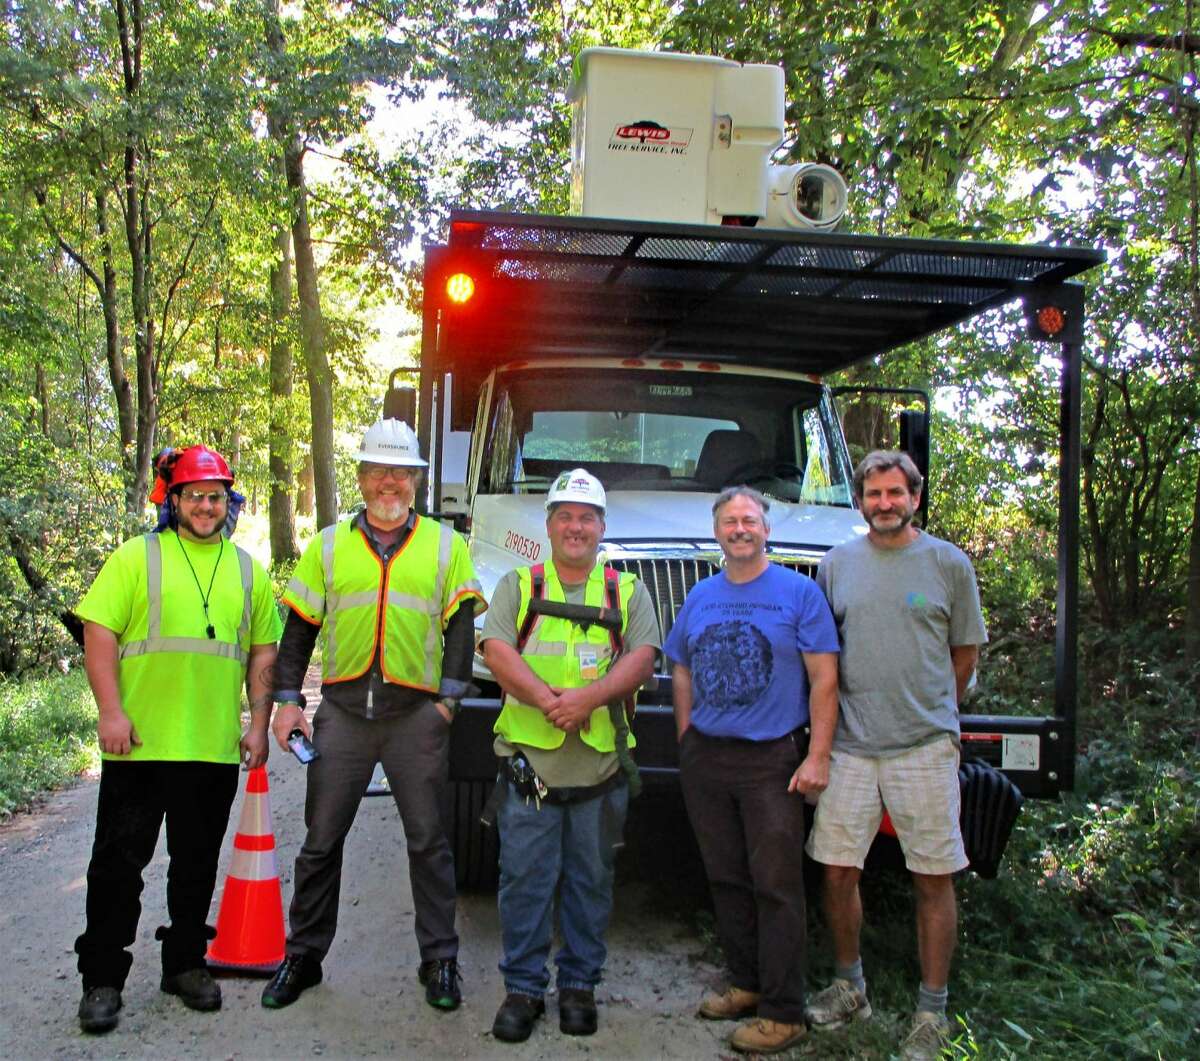 From left, Rob Molito, Eversource groundsman, David Doyle, arborist, Scott Hall, I.S.A. certified arborist, Jack Swatt, president of CT Chapter of the American Chestnut Foundation, and Richard Wilhem, Roxbury resident who discovered the rare chestnut tree.